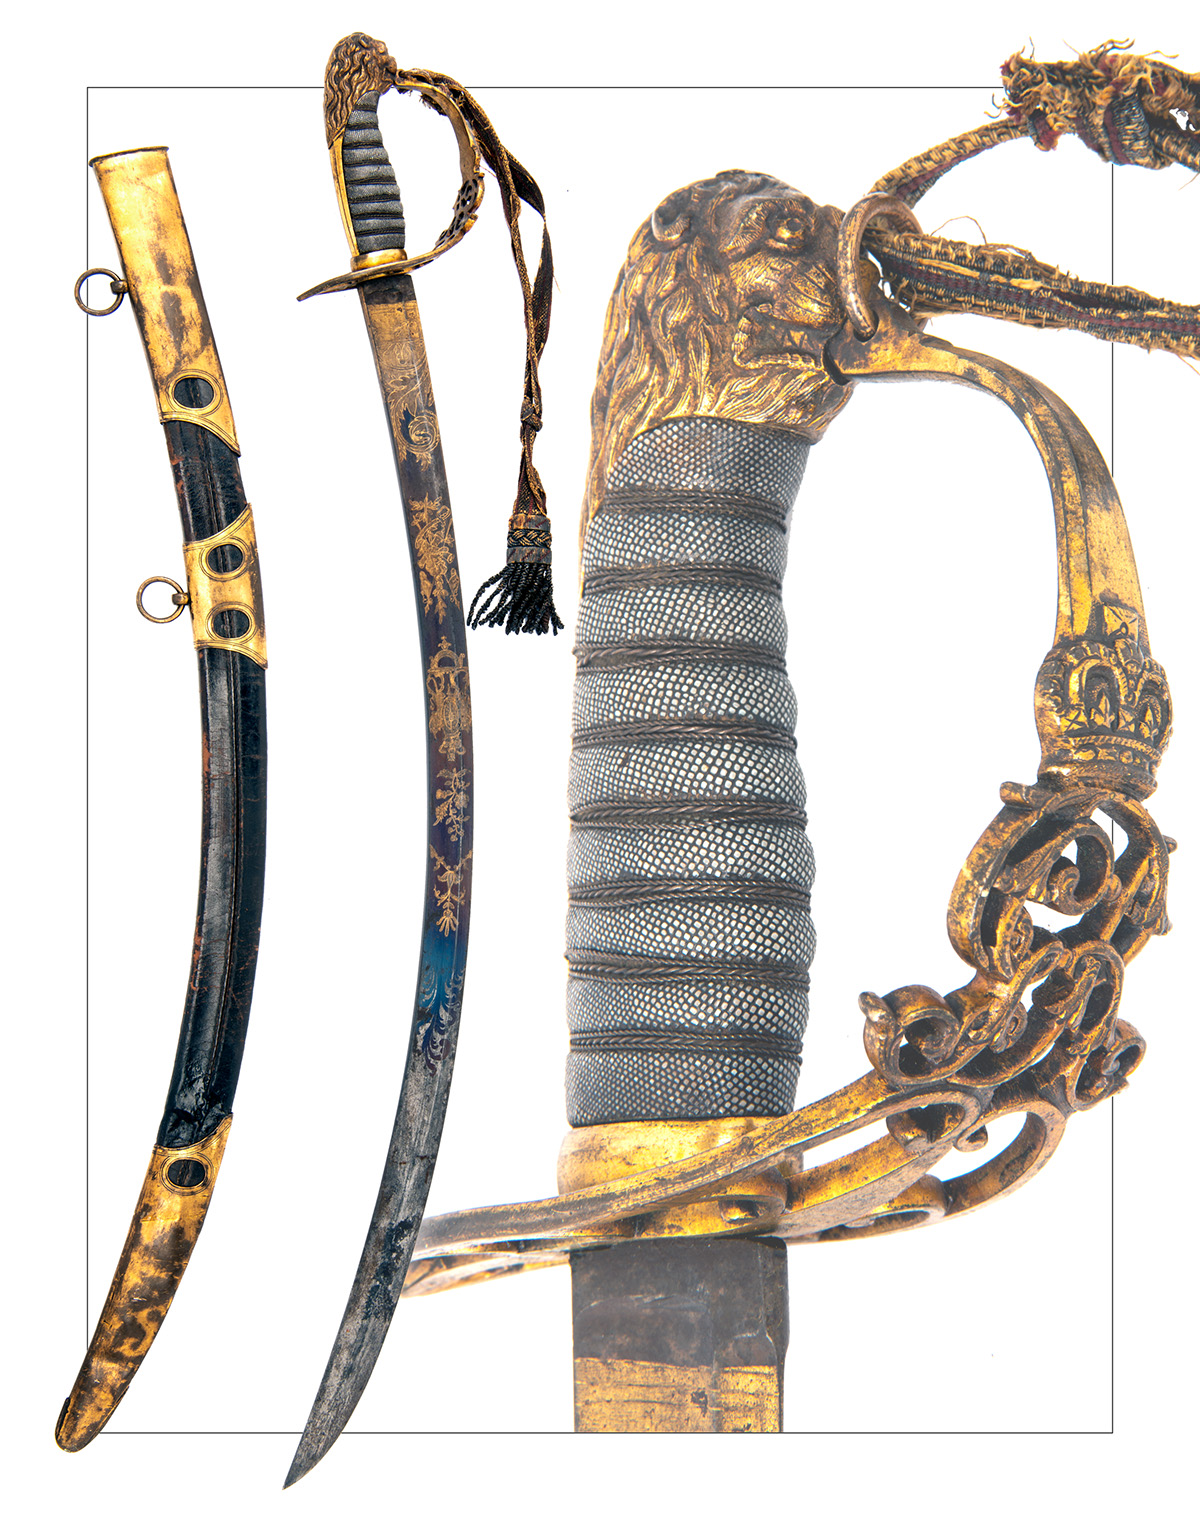 A BRITISH 1803 PATTERN INFANTRY or FLANK OFFICER'S SWORD WITH BLUE AND GILT BLADE, UNSIGNED, circa